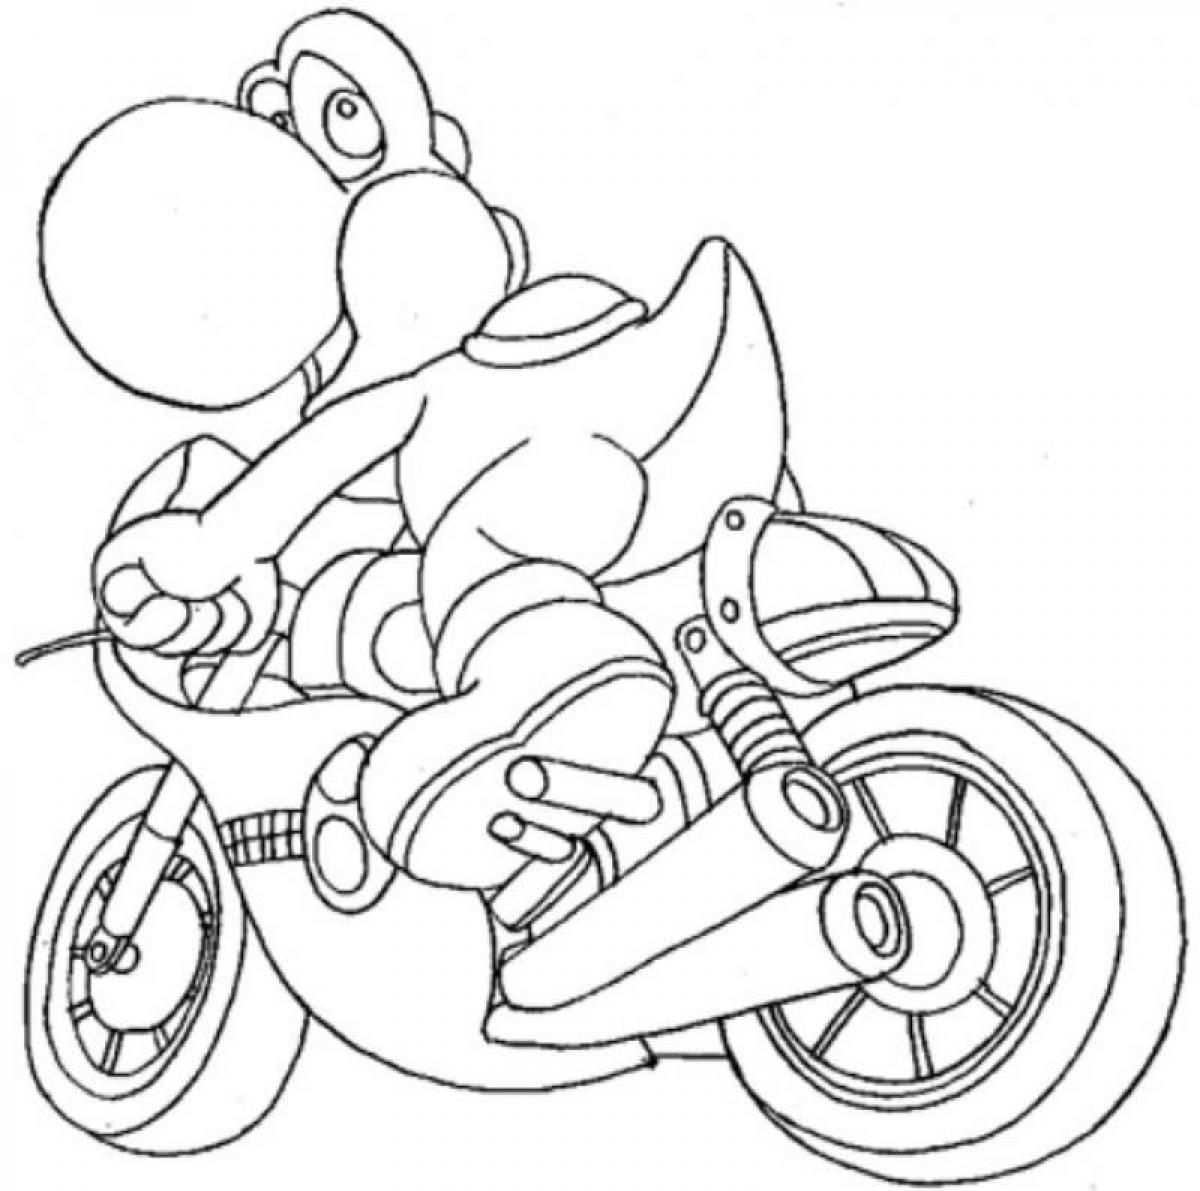 Yoshi Coloring Pages Riding Motorcycle With Images Mario